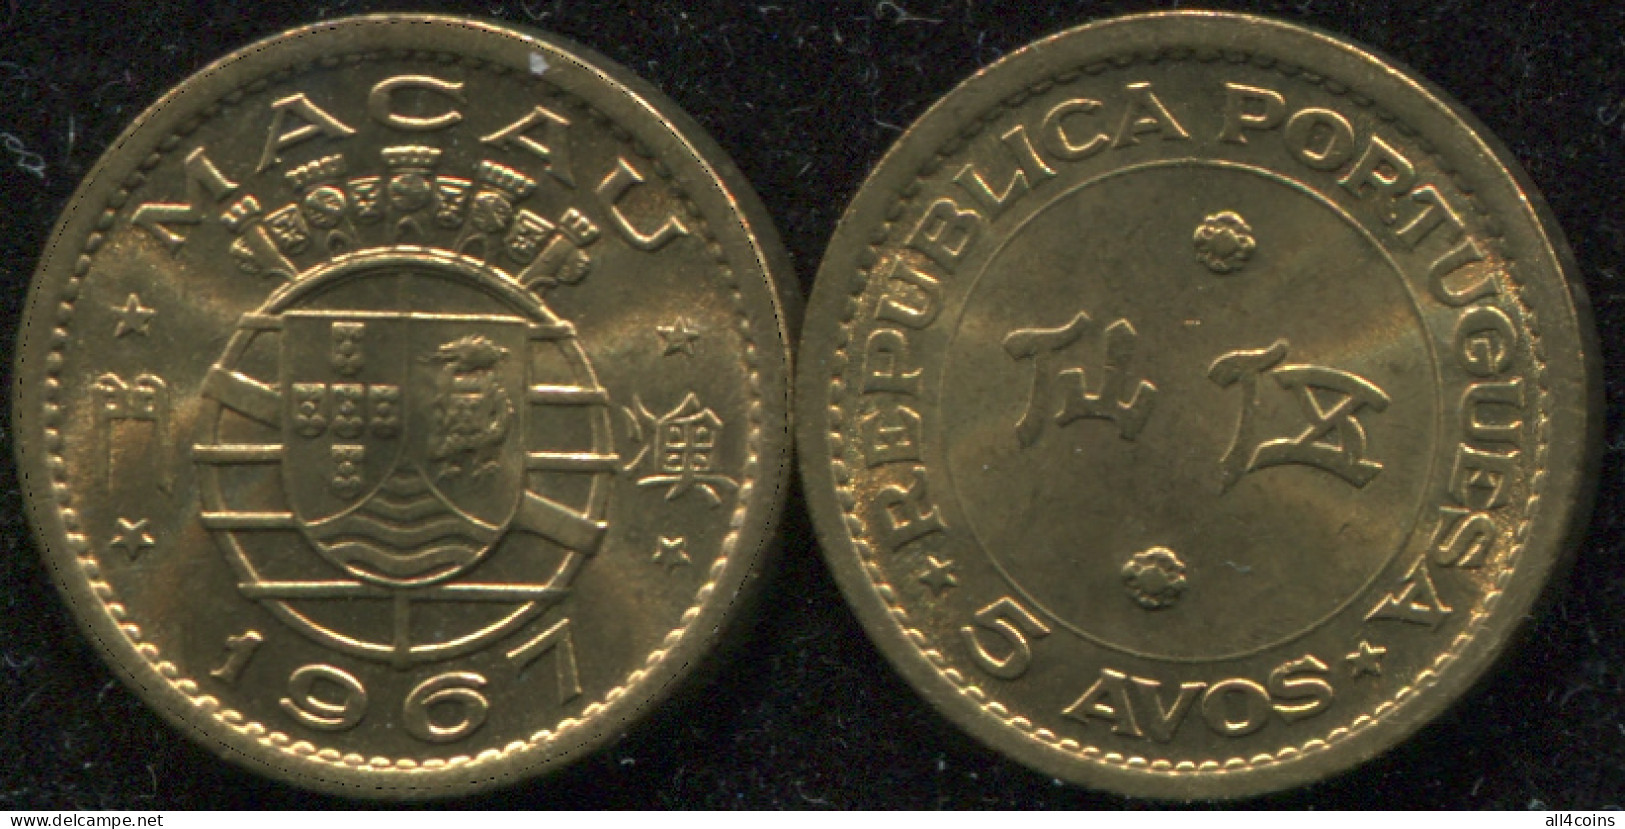 Macao [Portugal] 5 Avos. 1967 (Coin KM#1a. Unc) - Macao